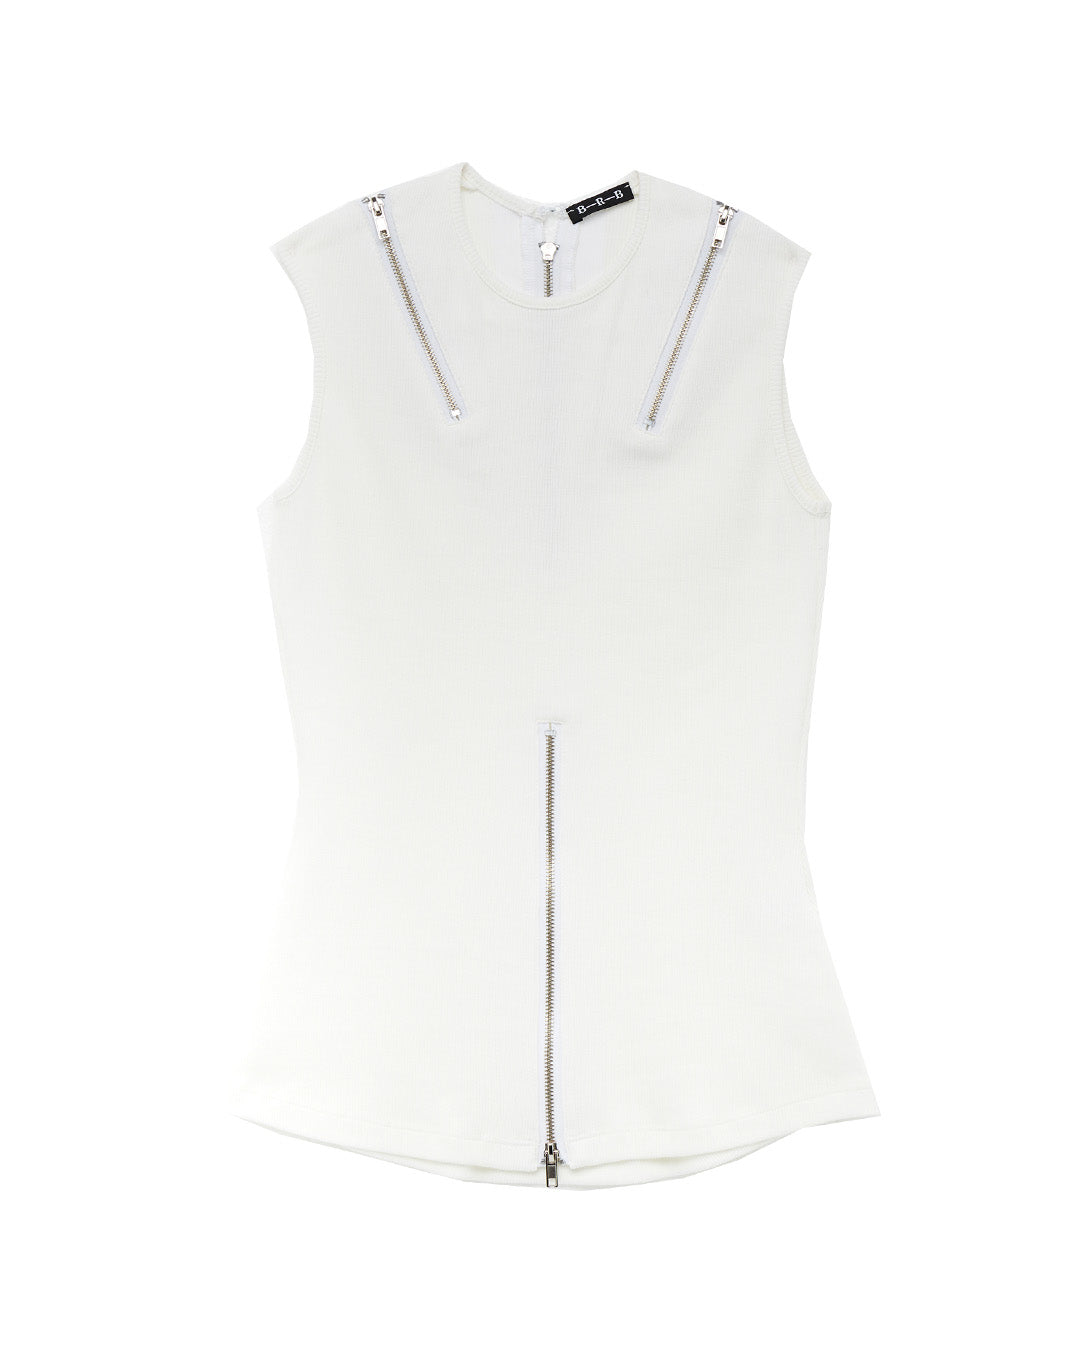 White, high neck, ribbed tank top with zips on shoulders and front. Made by Australian independent designer called BRB. Sold in Melbourne clothing boutique called Error404store.